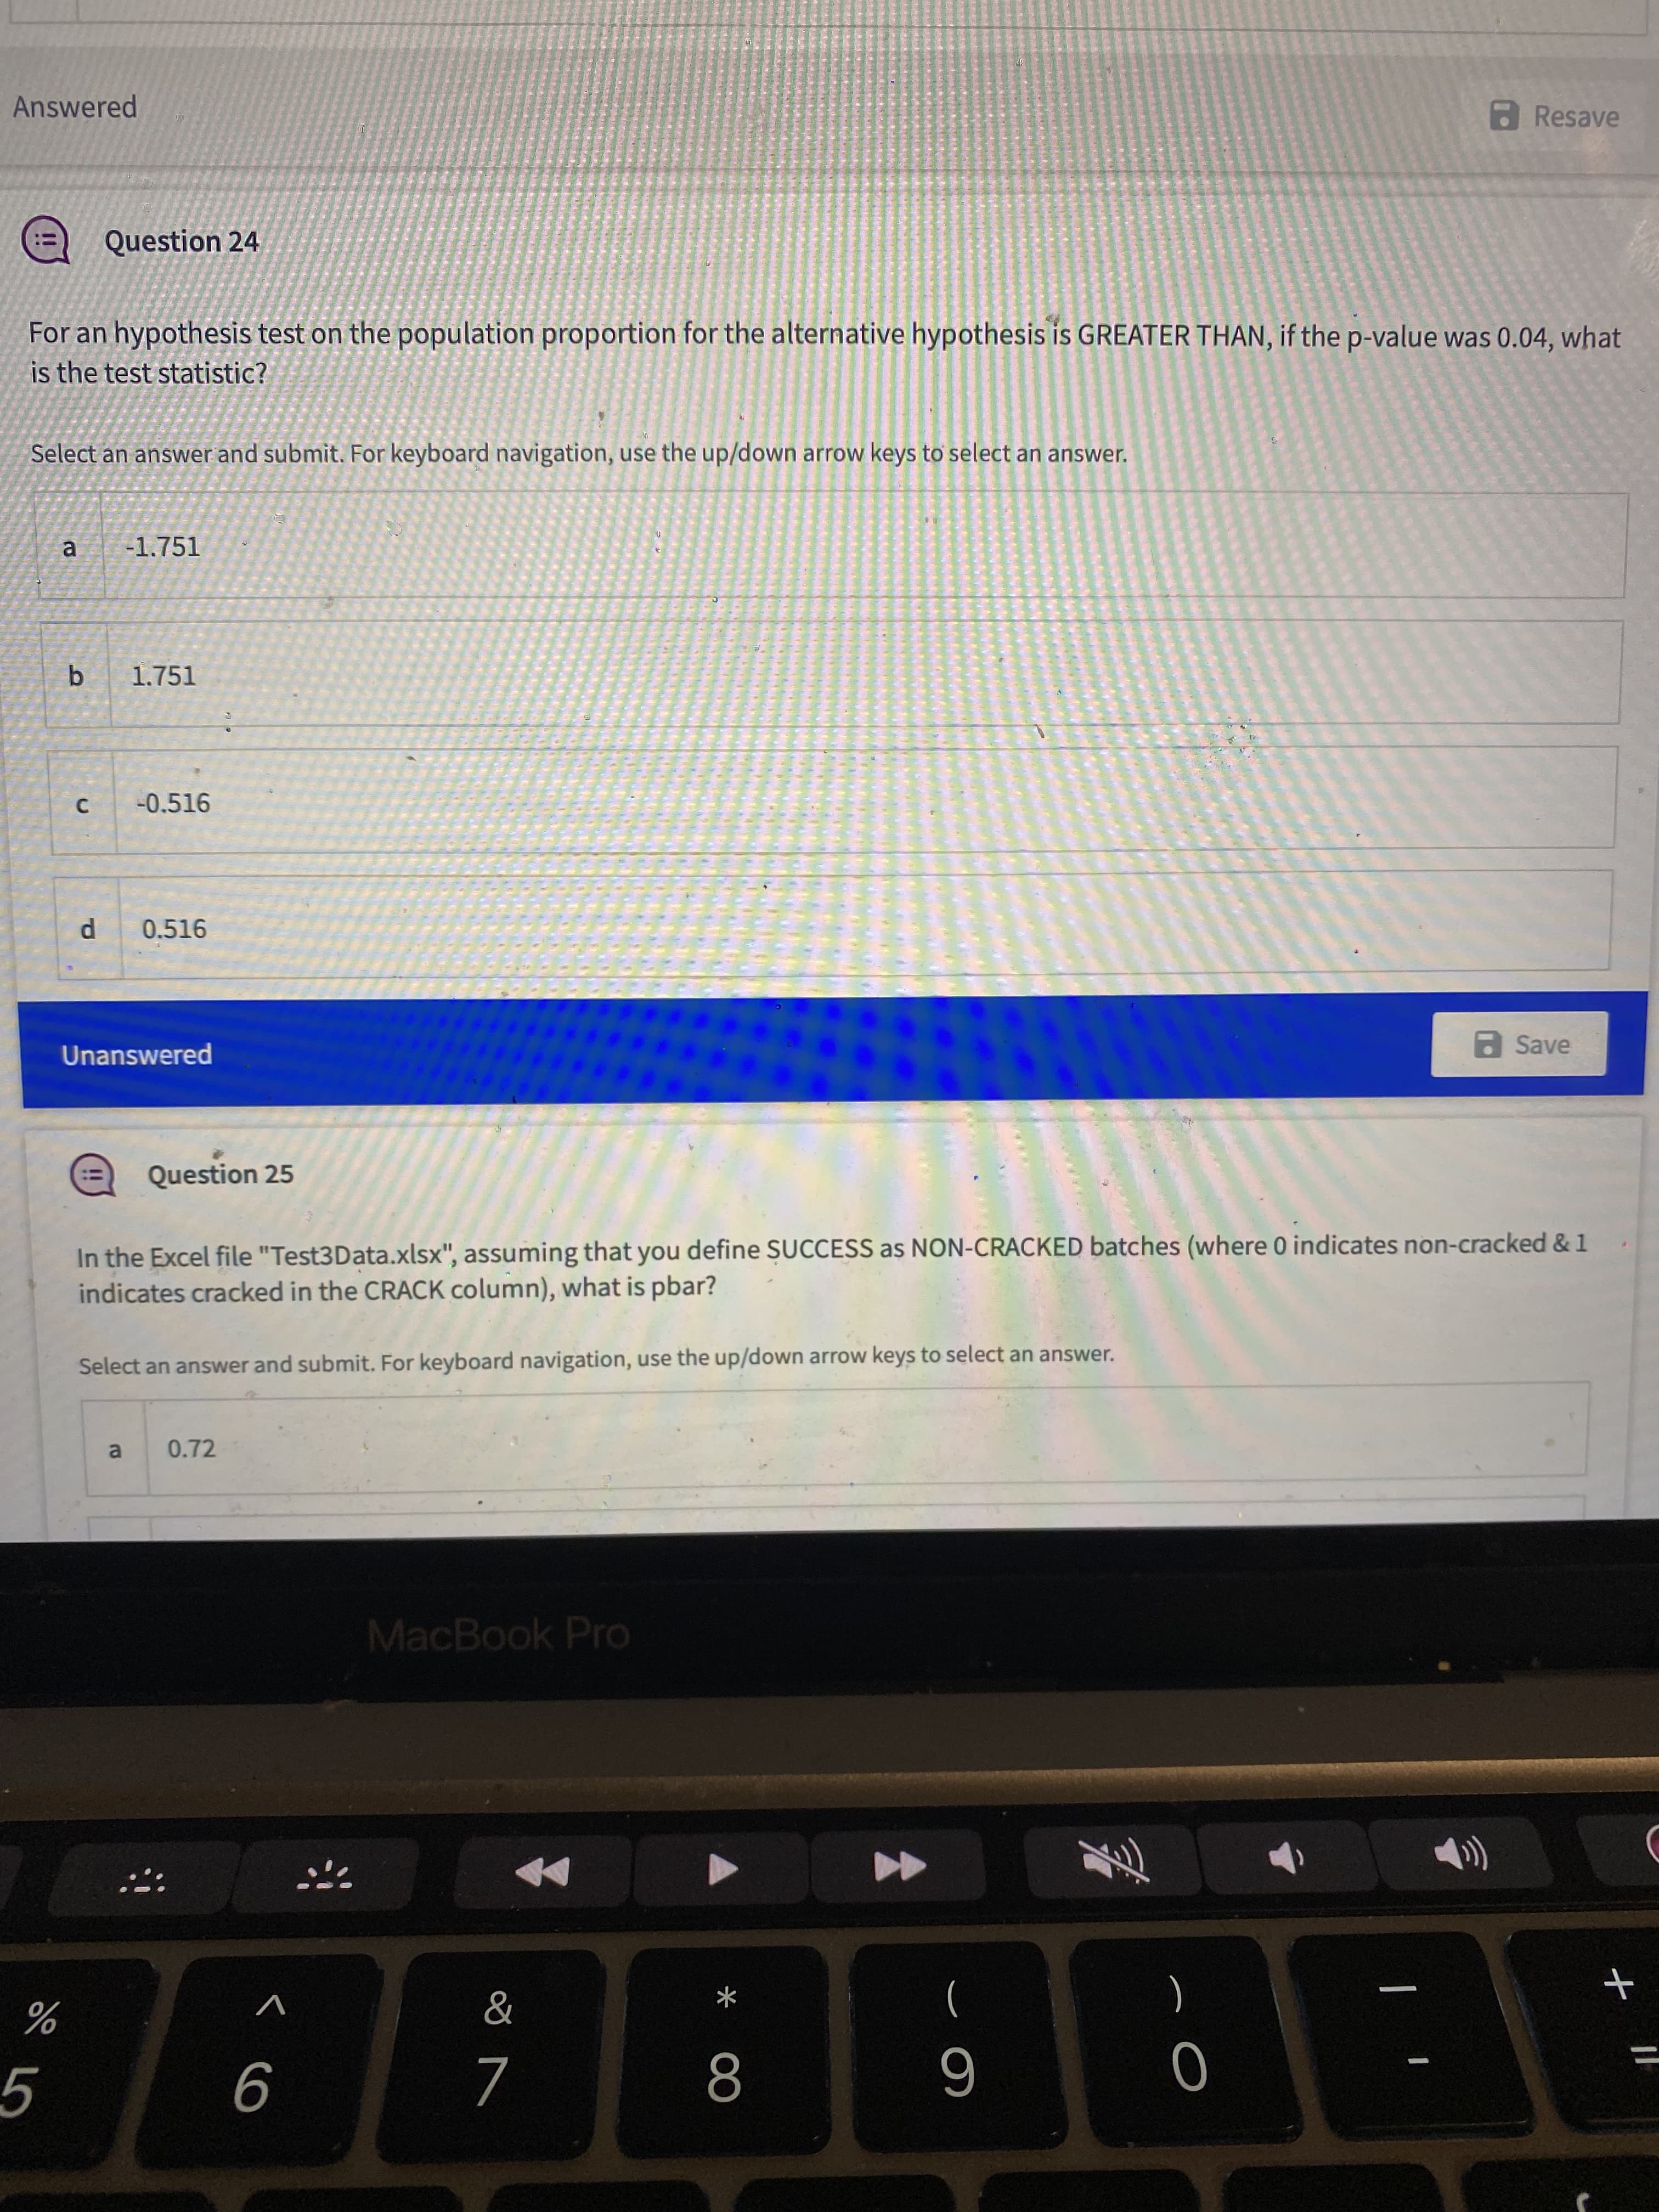 < co
Answered
a Resave
Question 24
!!
For an hypothesis test on the population proportion for the alternative hypothesis is GREATER THAN, if the p-value was 0.04, what
is the test statistic?
Select an answer and submit. For keyboard navigation, use the up/down arrow keys to select an answer.
-1.751
1.751
-0.516
0.516
Unanswered
a Save
Question 25
In the Excel file "Test3Data.xlsx", assuming that you define SUCCESS as NON-CRACKED batches (where 0 indicates non-cracked & 1
indicates cracked in the CRACK column), what is pbar?
Select an answer and submit. For keyboard navigation, use the up/down arrow keys to select an answer.
0.72
a.
MacBook Pro
V
(
)
%3D
8.
